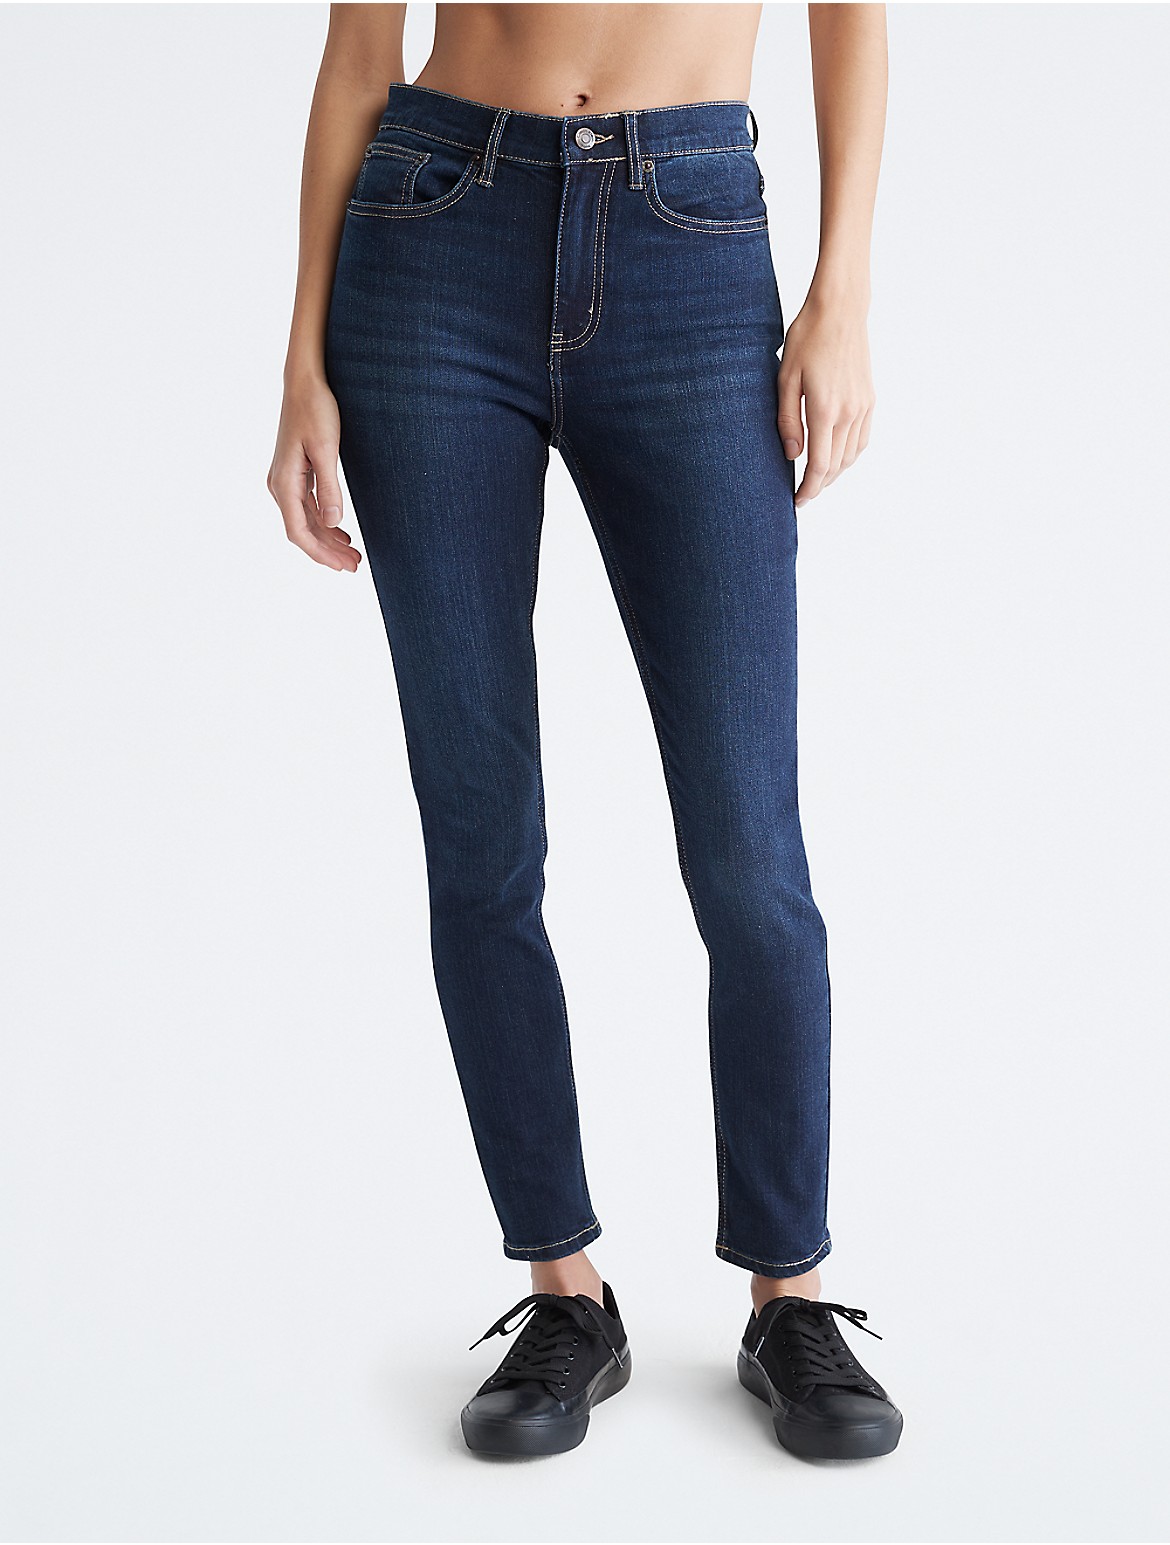 Calvin Klein Women's Skinny Fit High Rise Comfort Stretch Jeans - Blue - 24